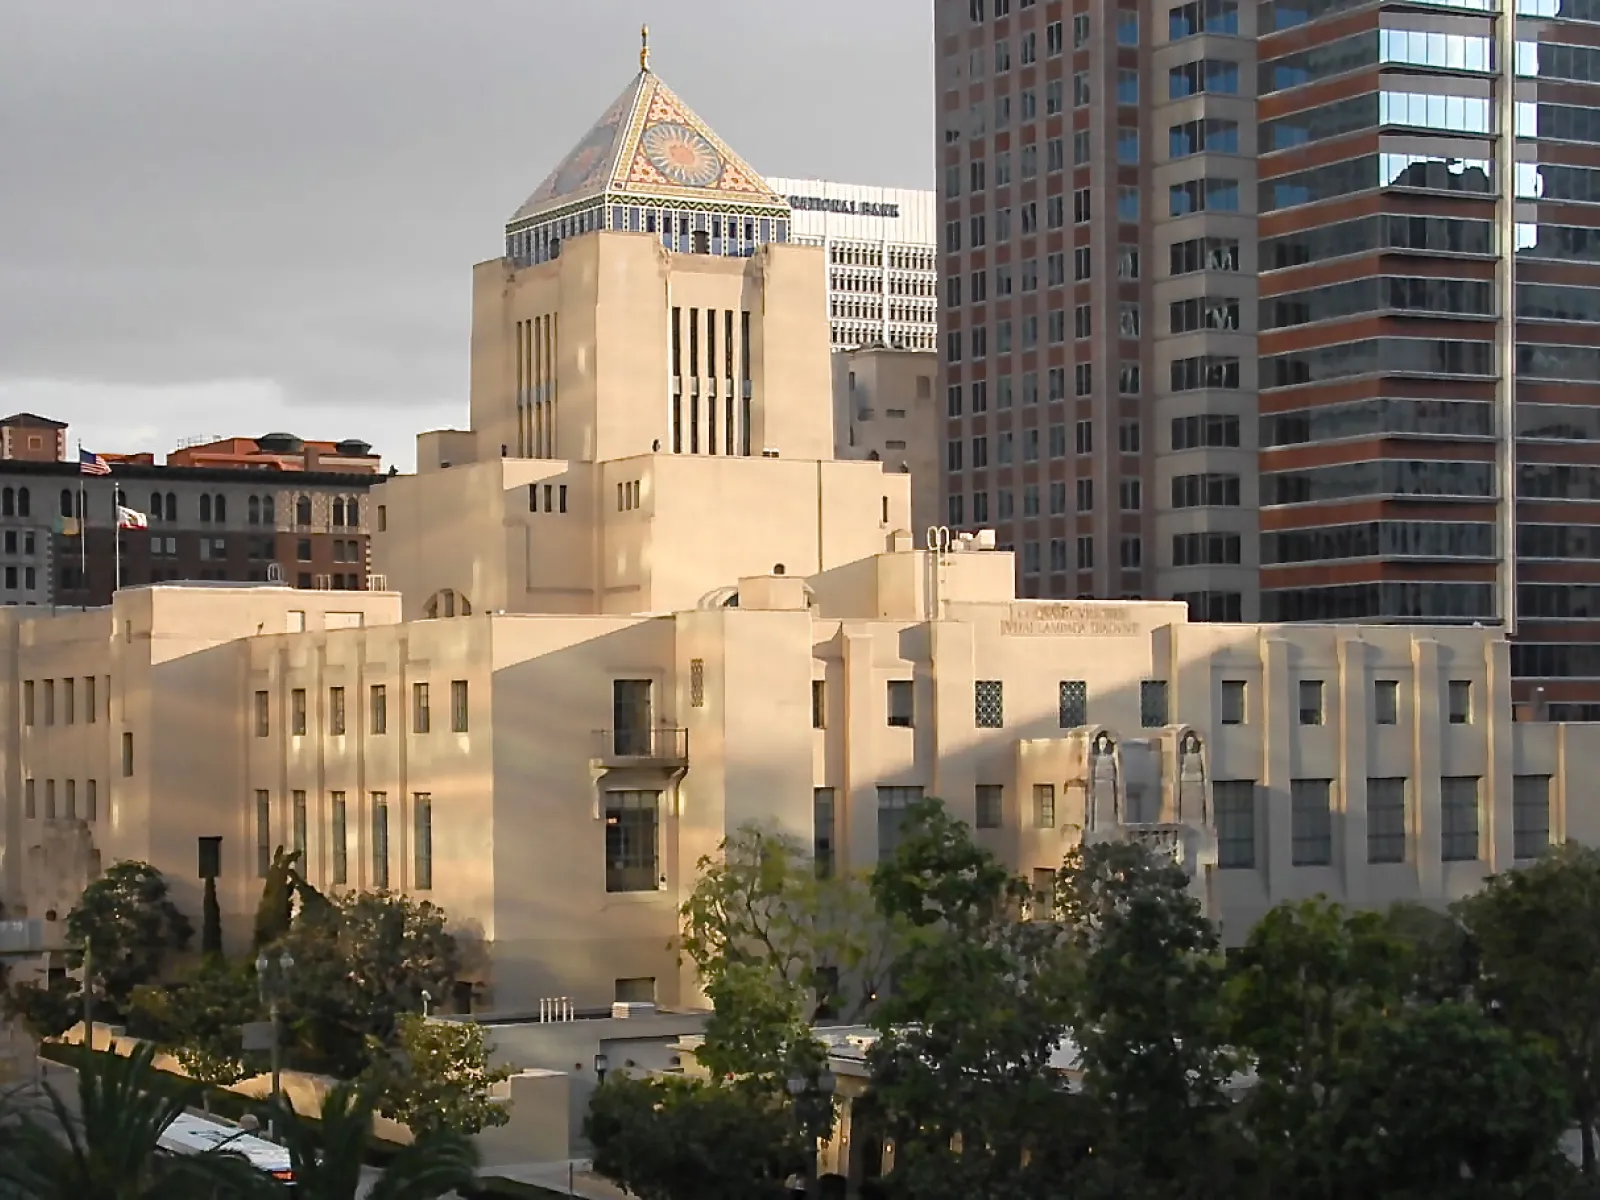 Los Angeles Central Library: The Story of an L.A. Icon ...